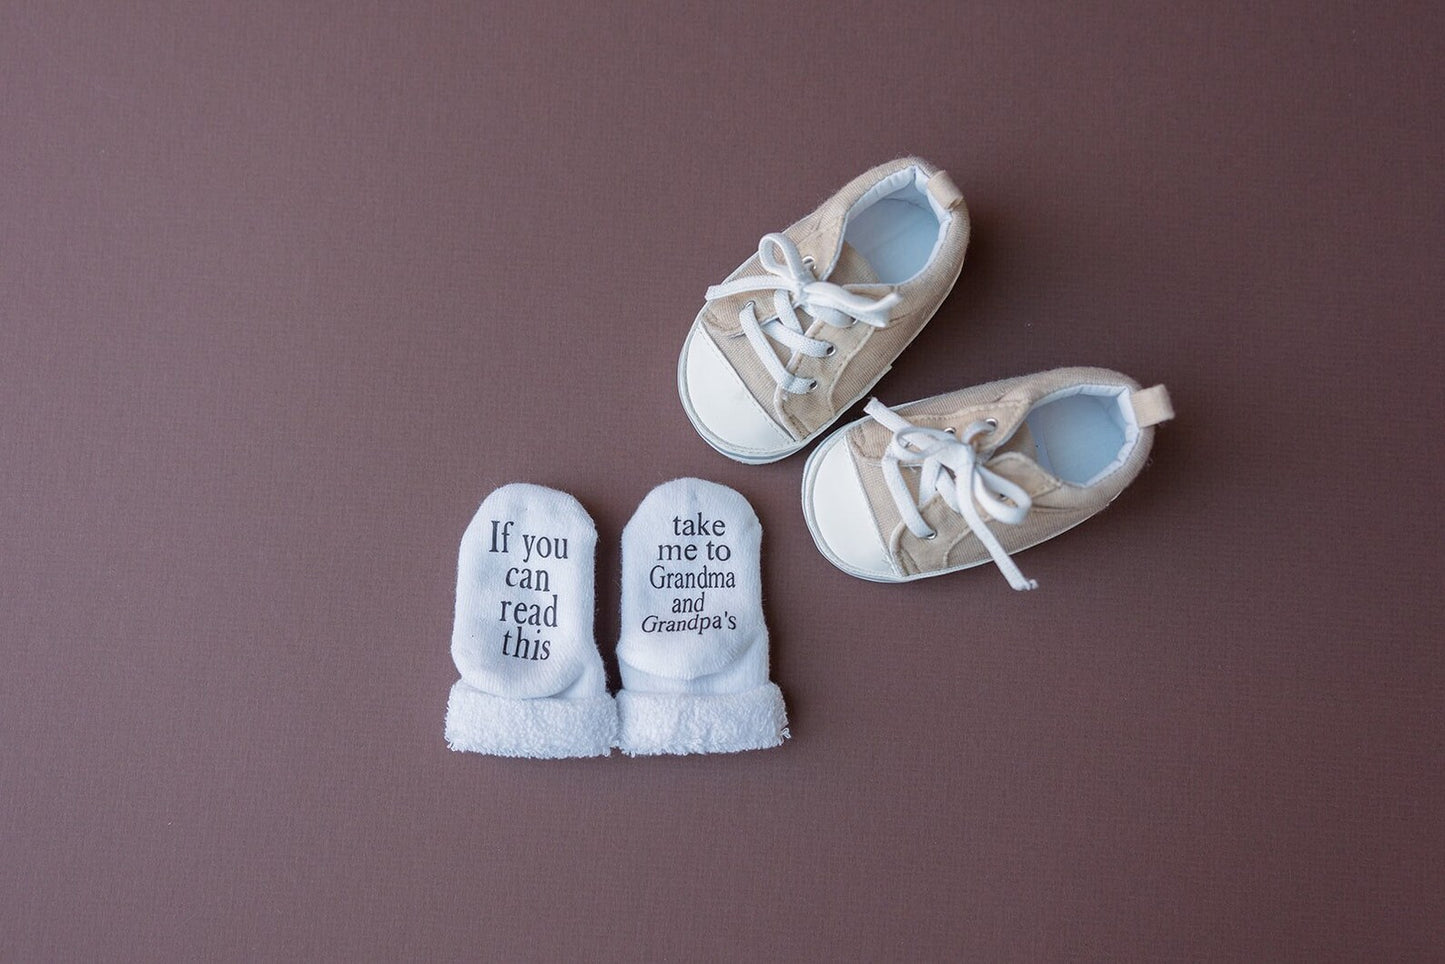 a picture of tan baby shoes and a pair of white baby socks that say if you can read this take me to grandma and grandpas on the sole of the feet on a purple background